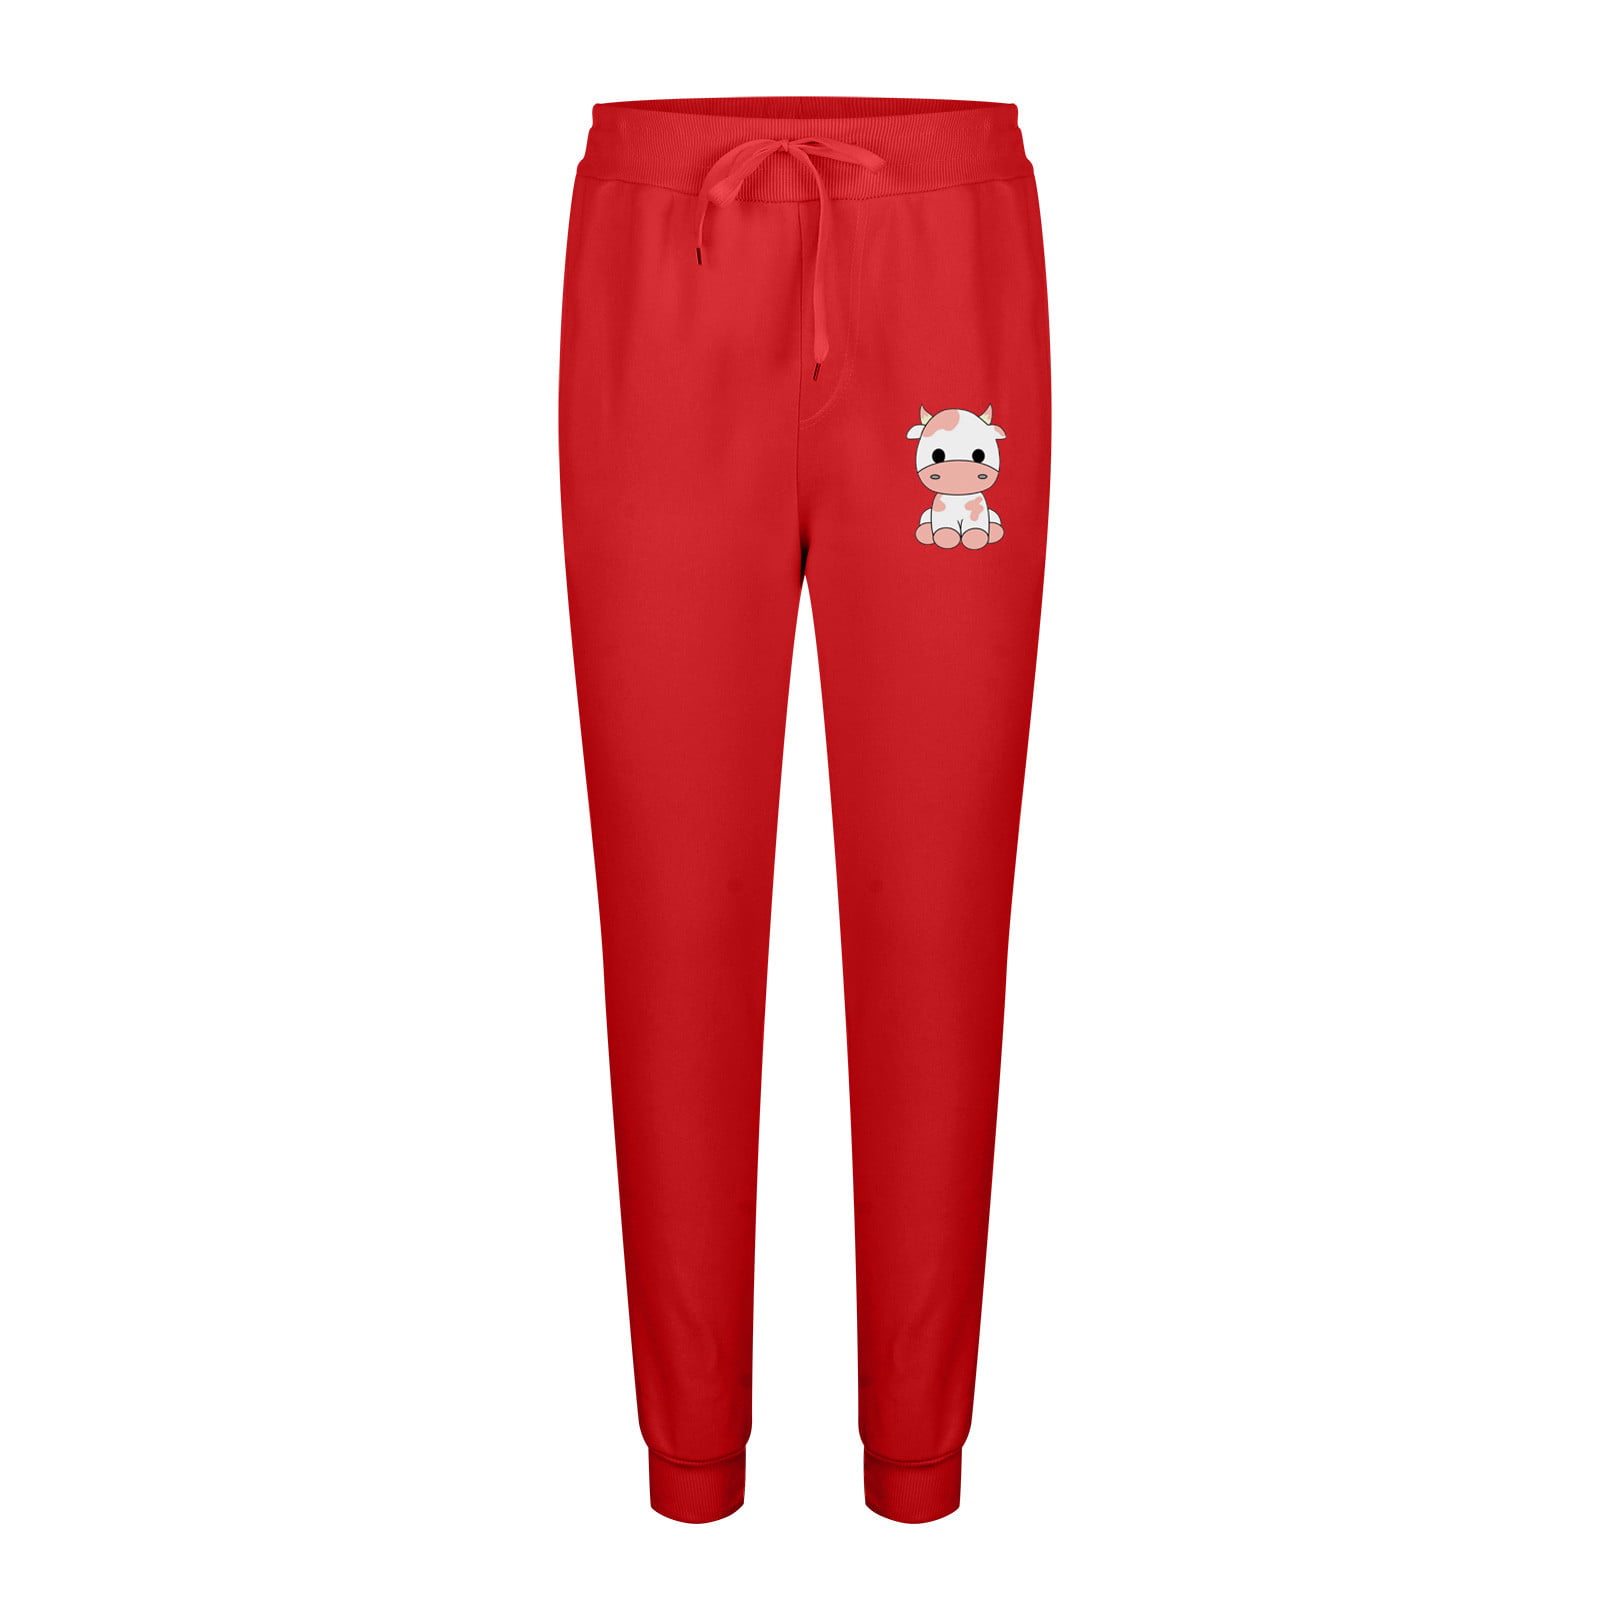 Best Deal for AFPANQZ Casual Athletic Sweatpants Cute Strawberry Cow